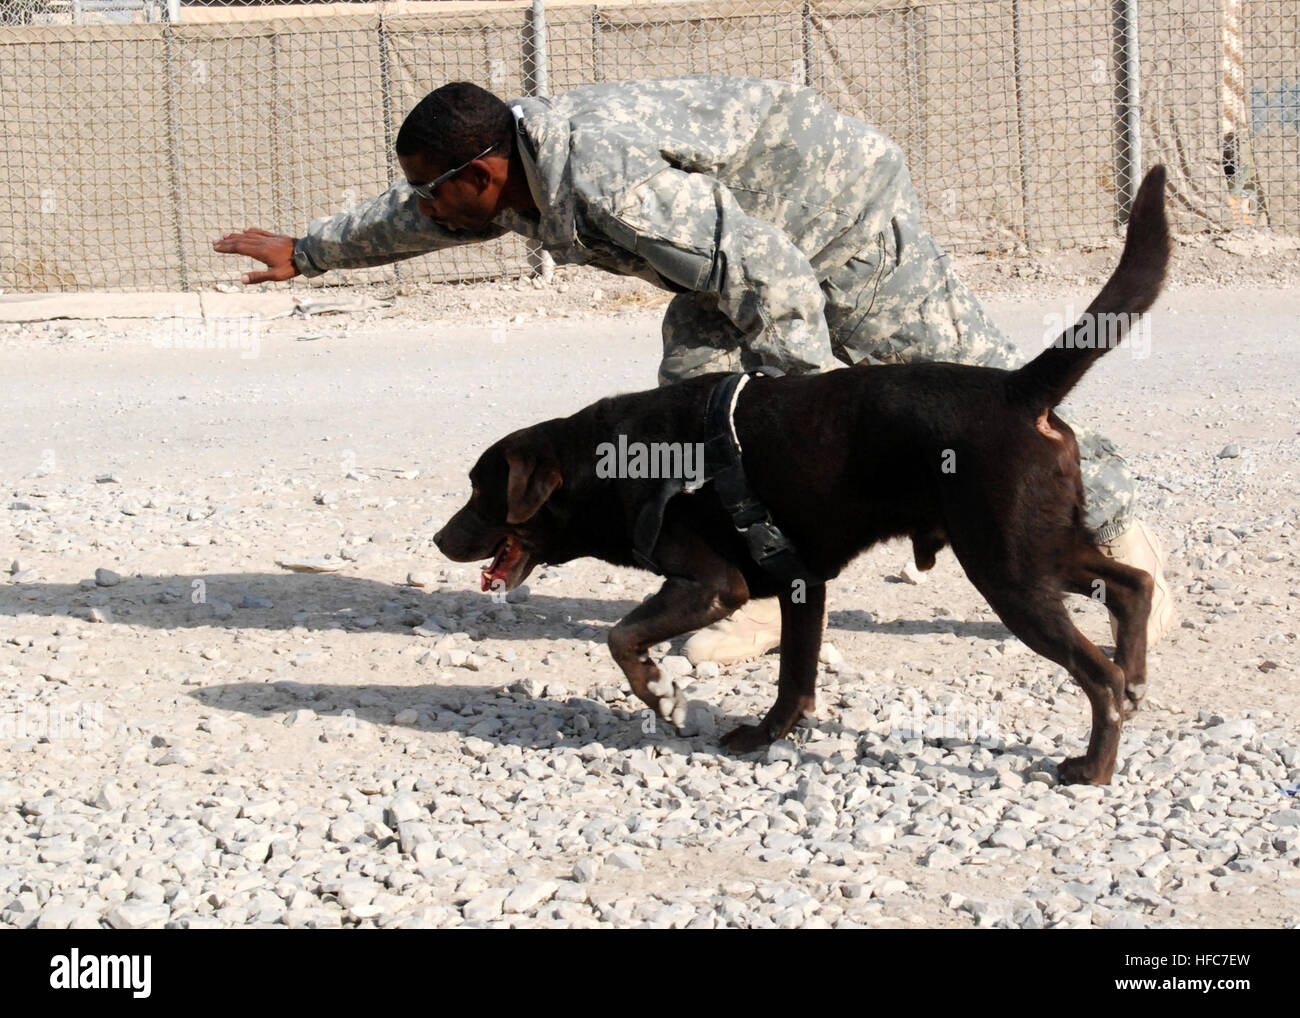 Sgt. Justin McGhee from the 67th Engineer Detachment from the Fifth Engineer Battalion directs Archie his explosive detection  K-9 during an training scenario at Kandahar Airfield. Sgt. McGhee and Archie are part of a detachment that search for improvised explosives devices in the Kandahar province of Afghanistan. K-9 unit searches for IEDs 357323 Stock Photo